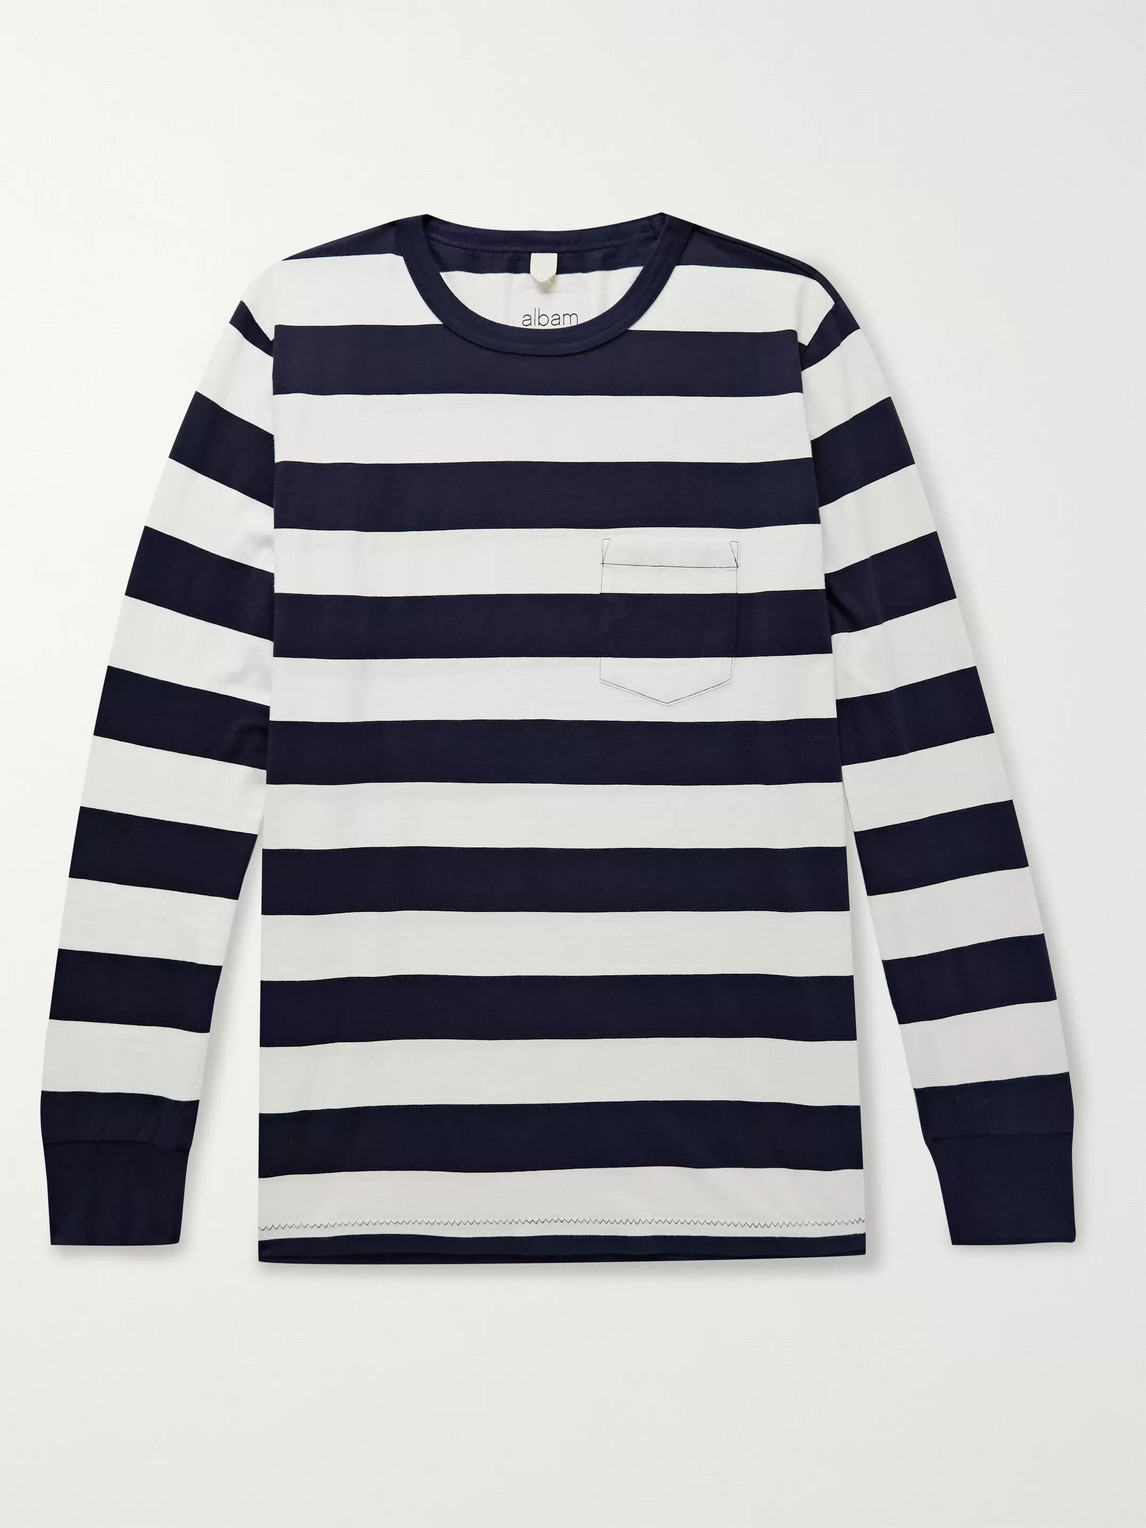 Albam Striped Cotton-jersey T-shirt In White